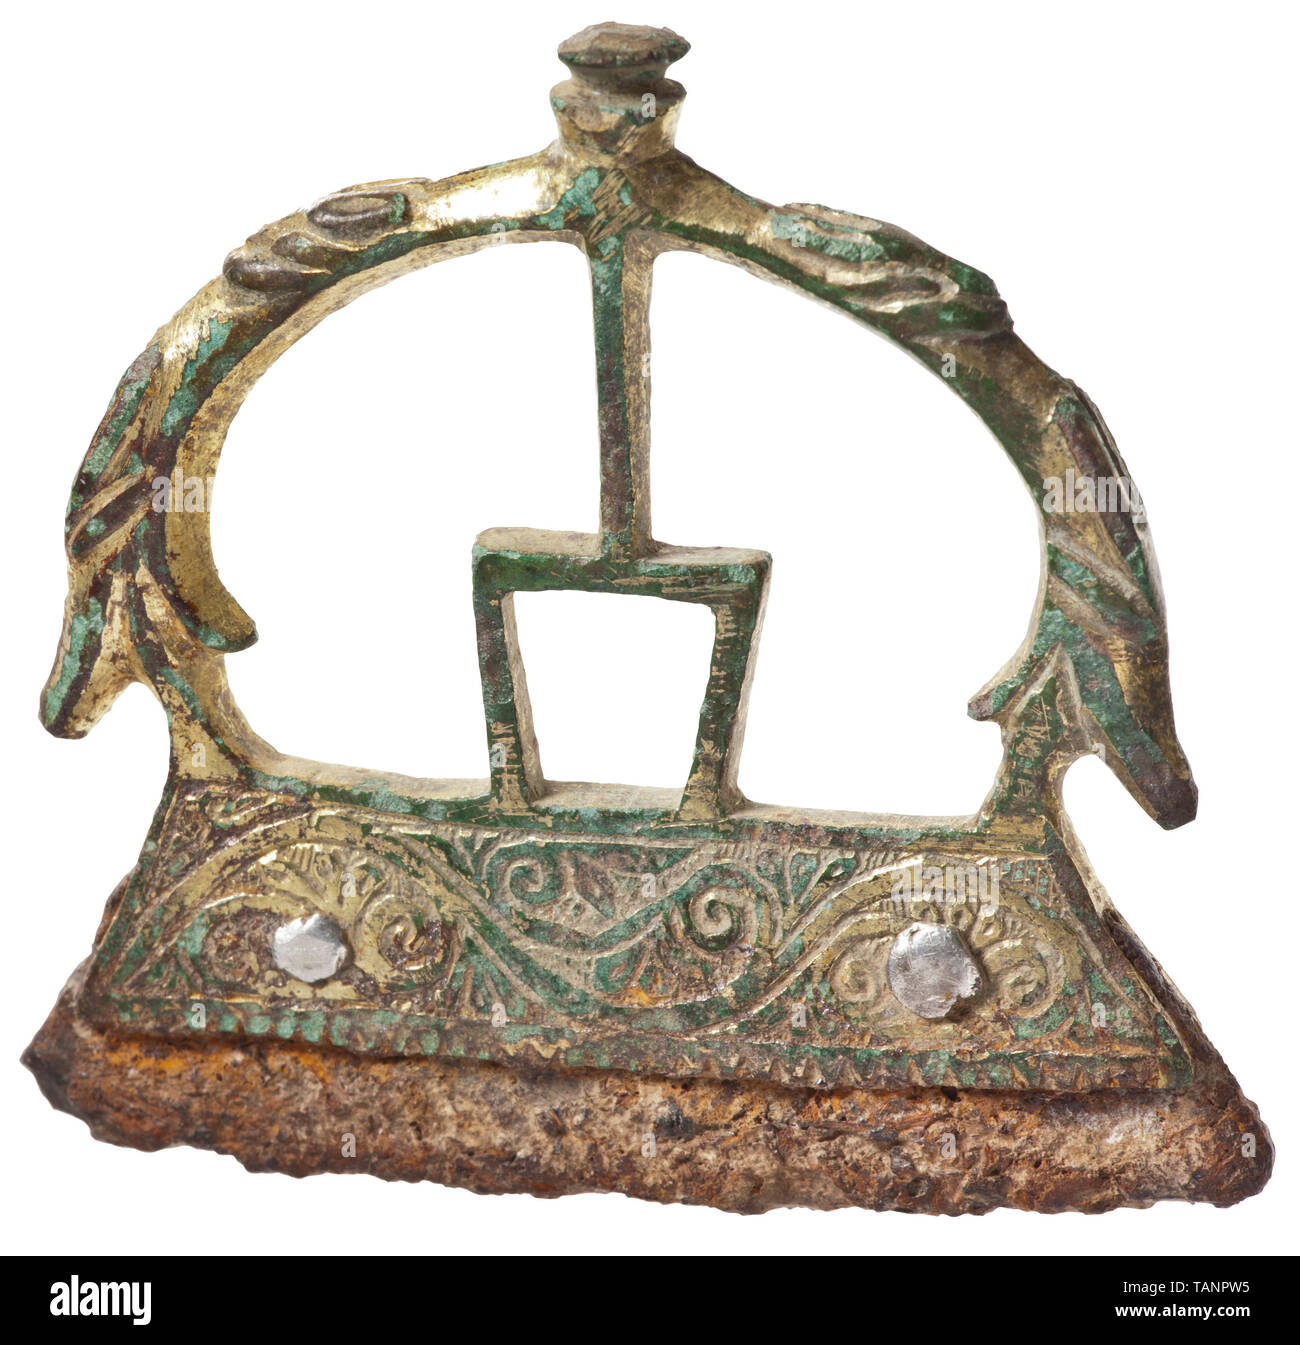 A richly decorated, Slavic-Byzantine fire striker, 9th - 10th century, Openwork bronze grip with gilt surface, stylised human figure at centre and two stylised animal heads at the sides. At bottom a trapezoid fire striker with bronze border and fine scrolling leaves in low relief. The fire striker fixed with two silver rivets located underneath the wave ornament. A work of extraordinary high quality from South Eastern Europe, made in the High Middle Ages. Apart from minimal chippings at the lower edge of the fire striker in excellent condition. T, Additional-Rights-Clearance-Info-Not-Available Stock Photo